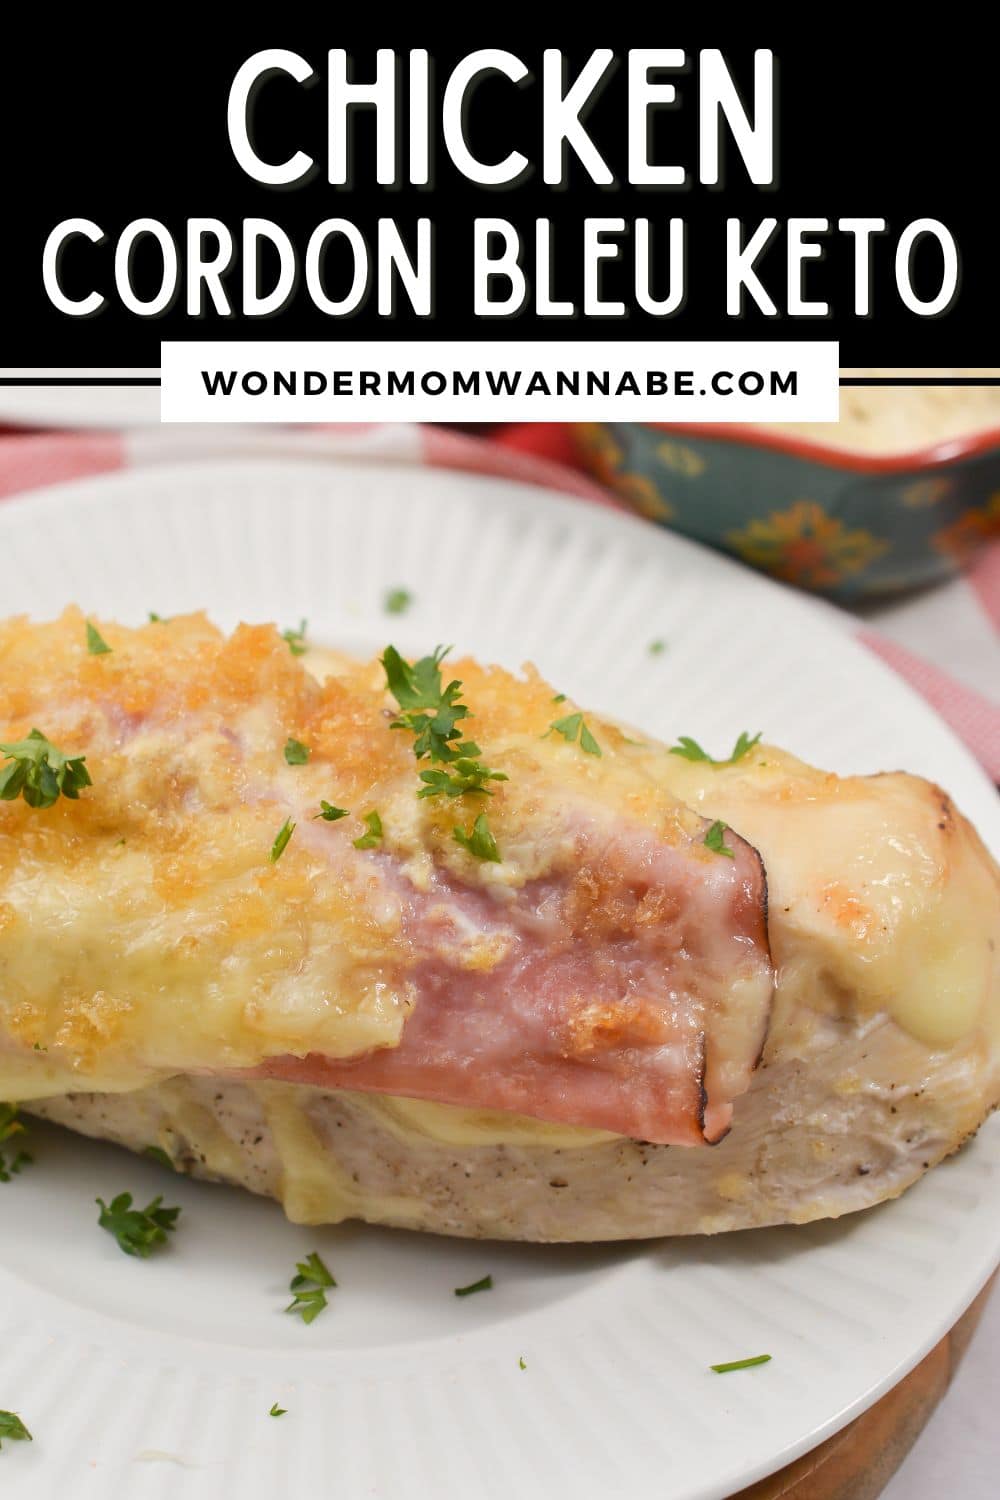 Chicken cordon bleu, a popular dish with crispy breaded chicken stuffed with gooey cheese and savory ham, transformed into a delicious keto-friendly meal served elegantly on a plate.